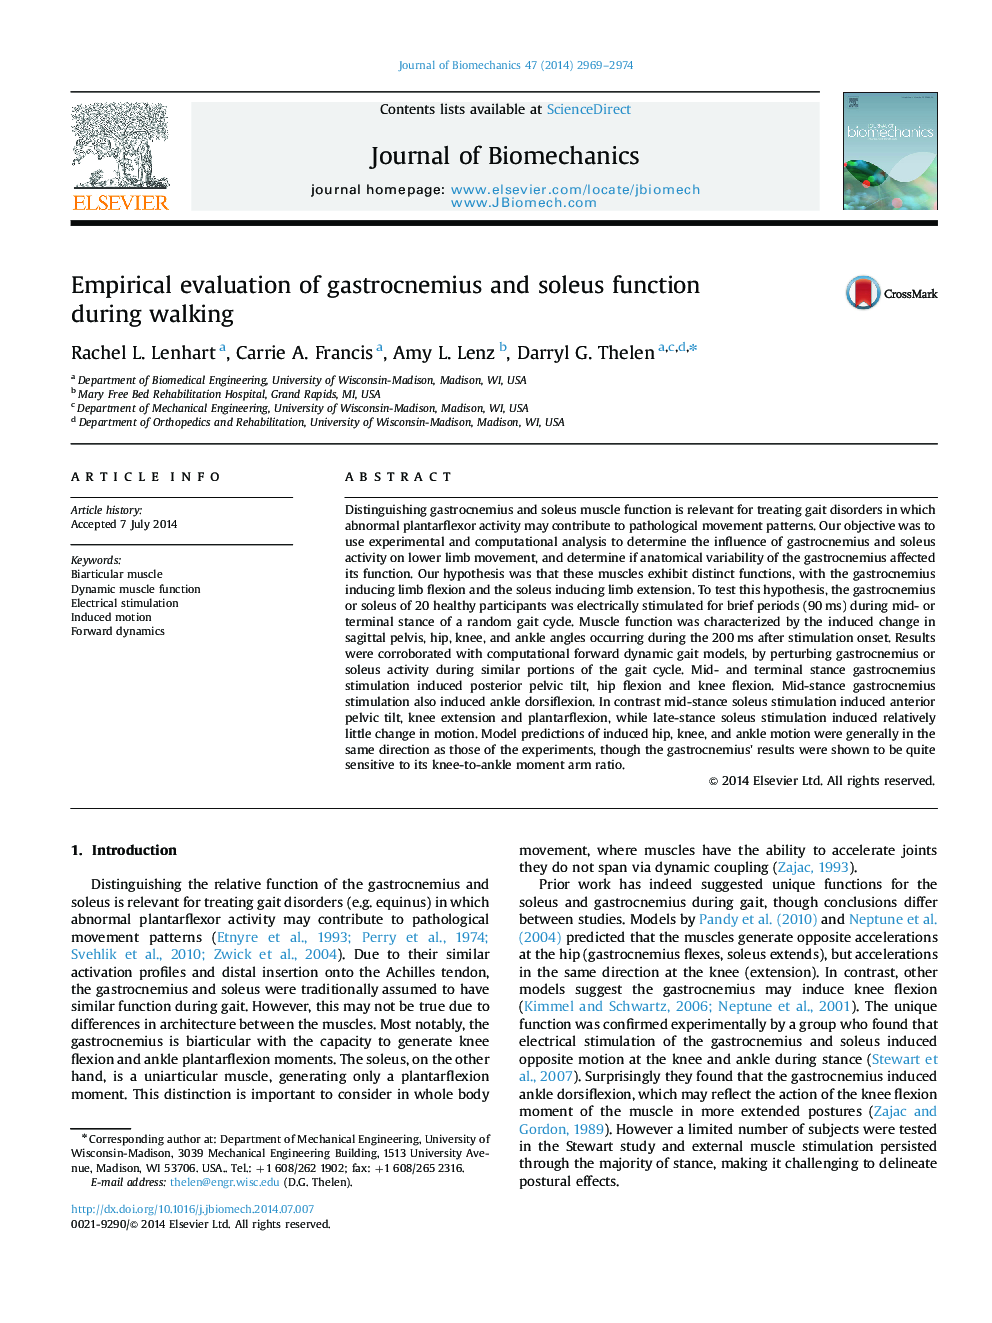 Empirical evaluation of gastrocnemius and soleus function during walking